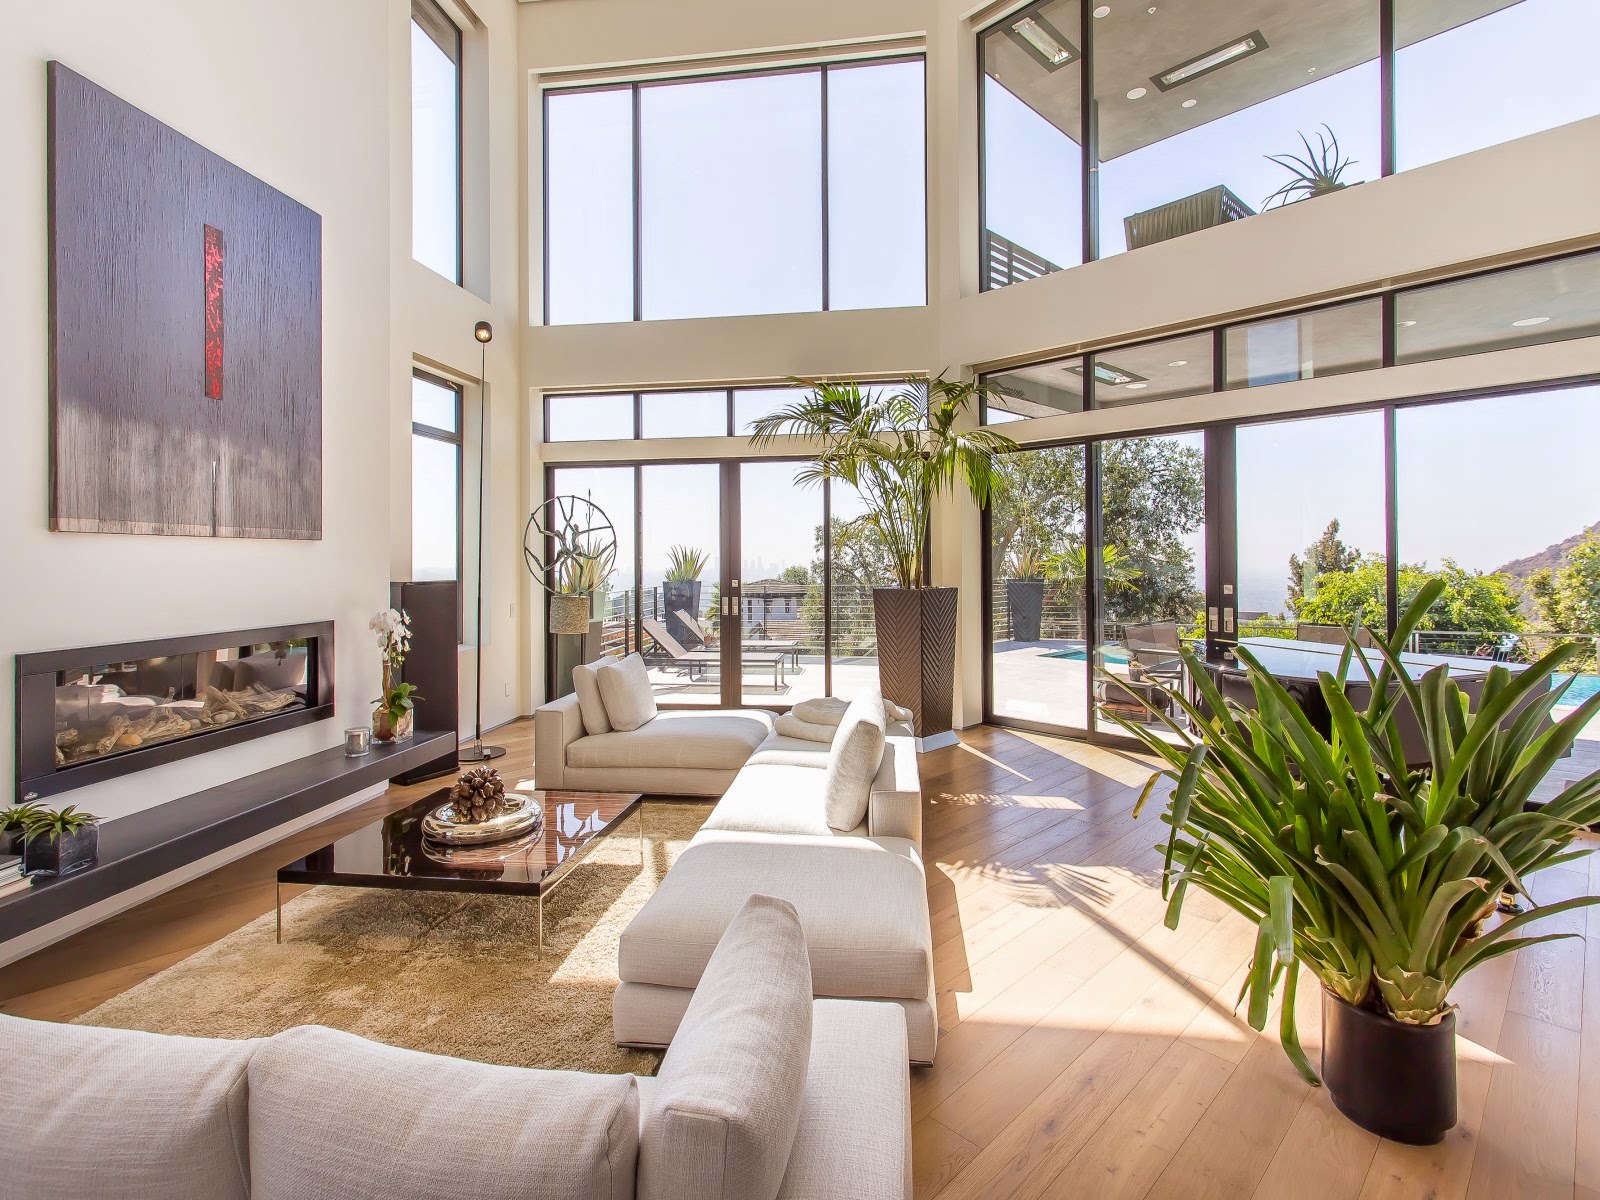 Hollywood estate with light wood floor and large windows